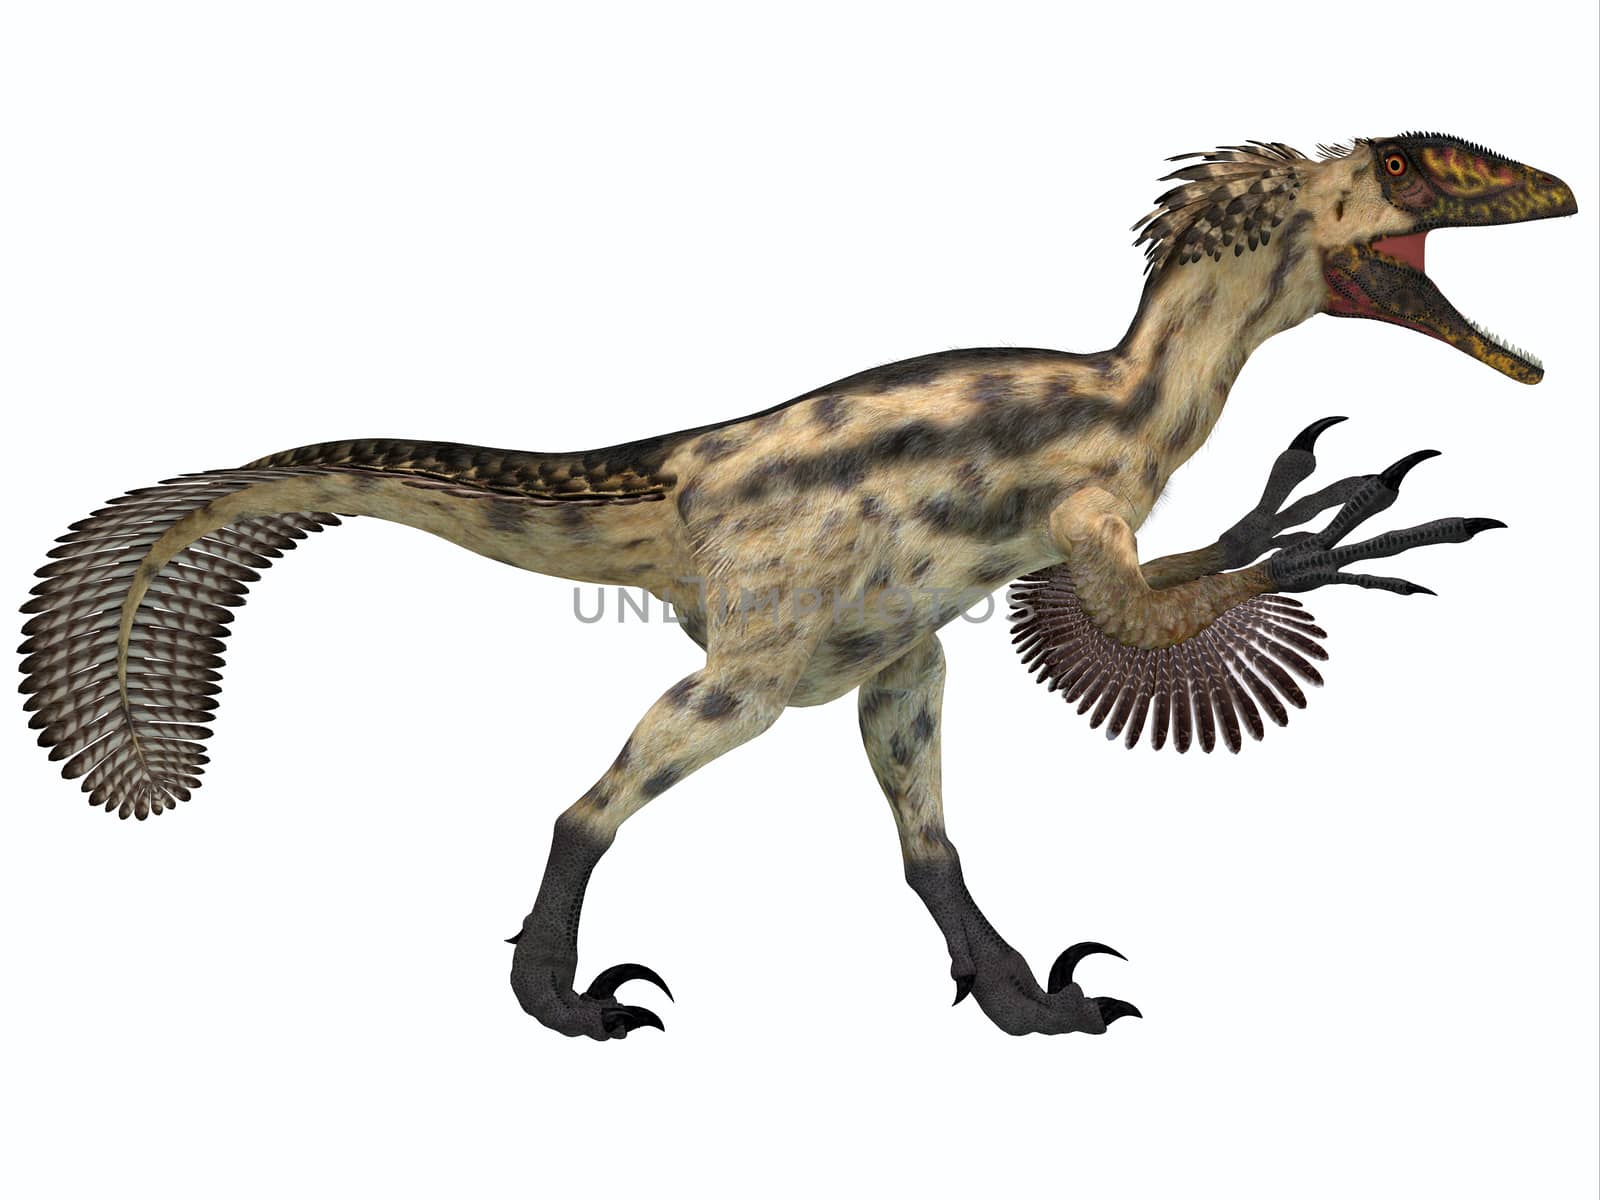 Deinonychus is a carnivorous dinosaur from the early Cretaceous Period.